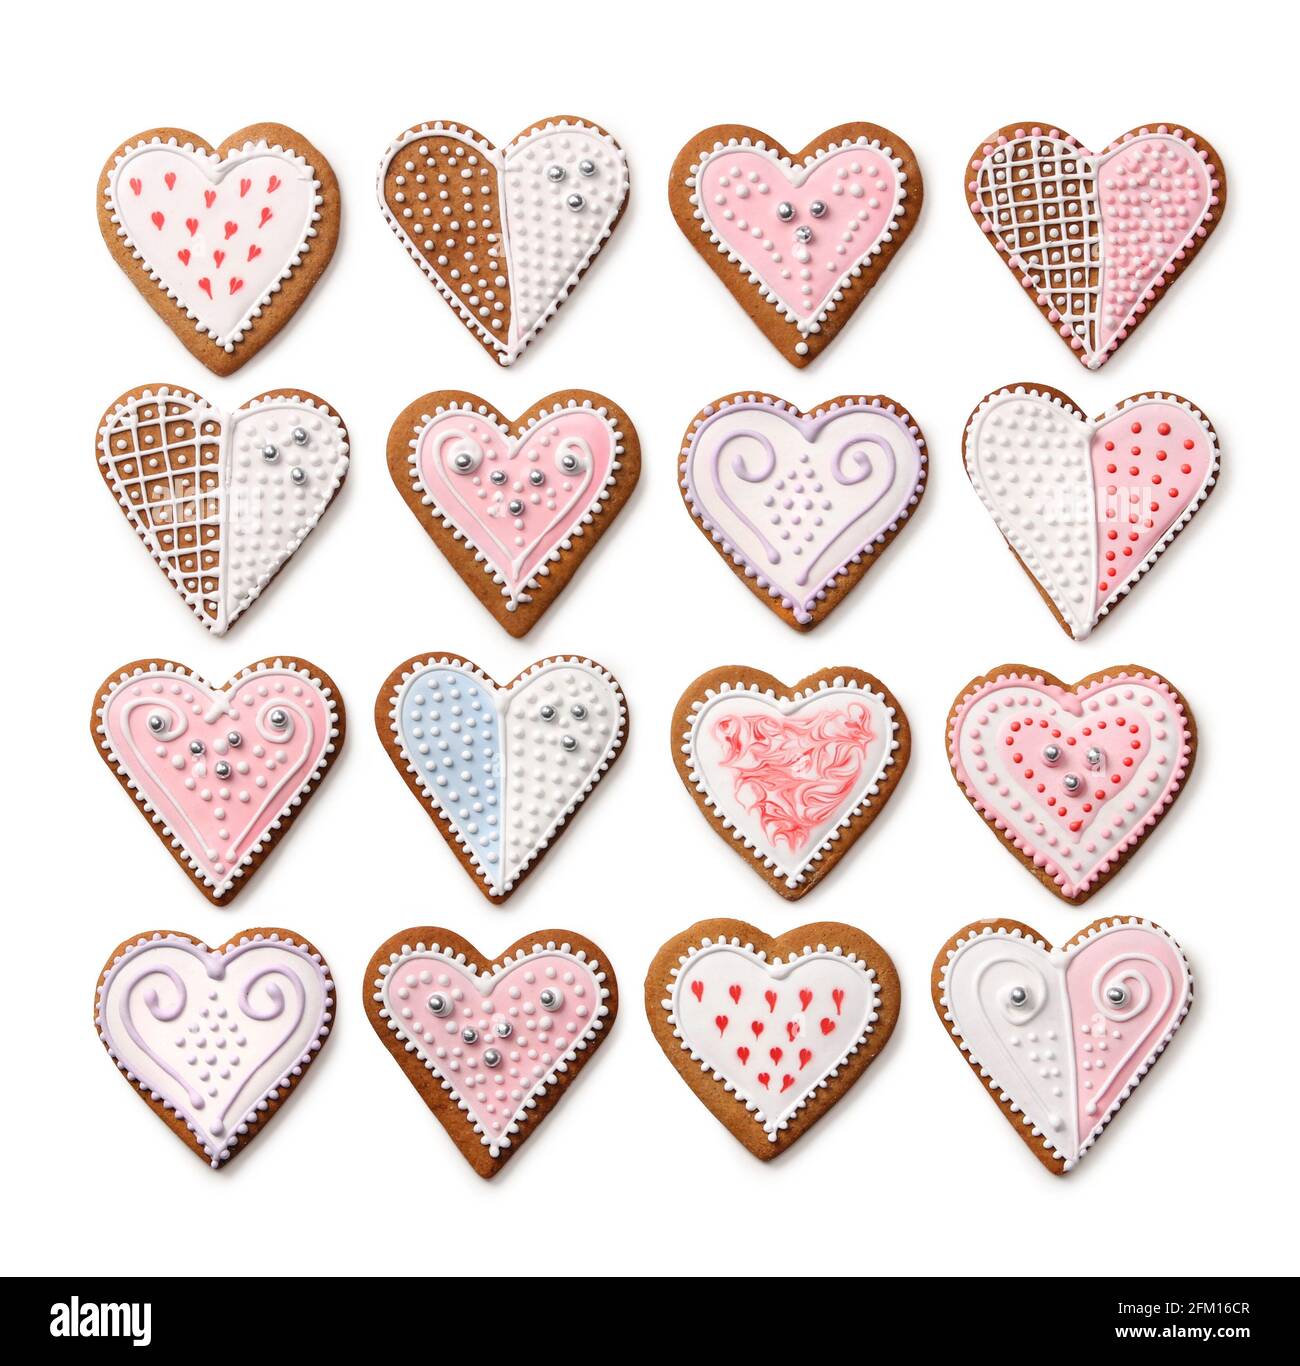 Sweet Christmas heart shaped gingerbread cookies collection with ...